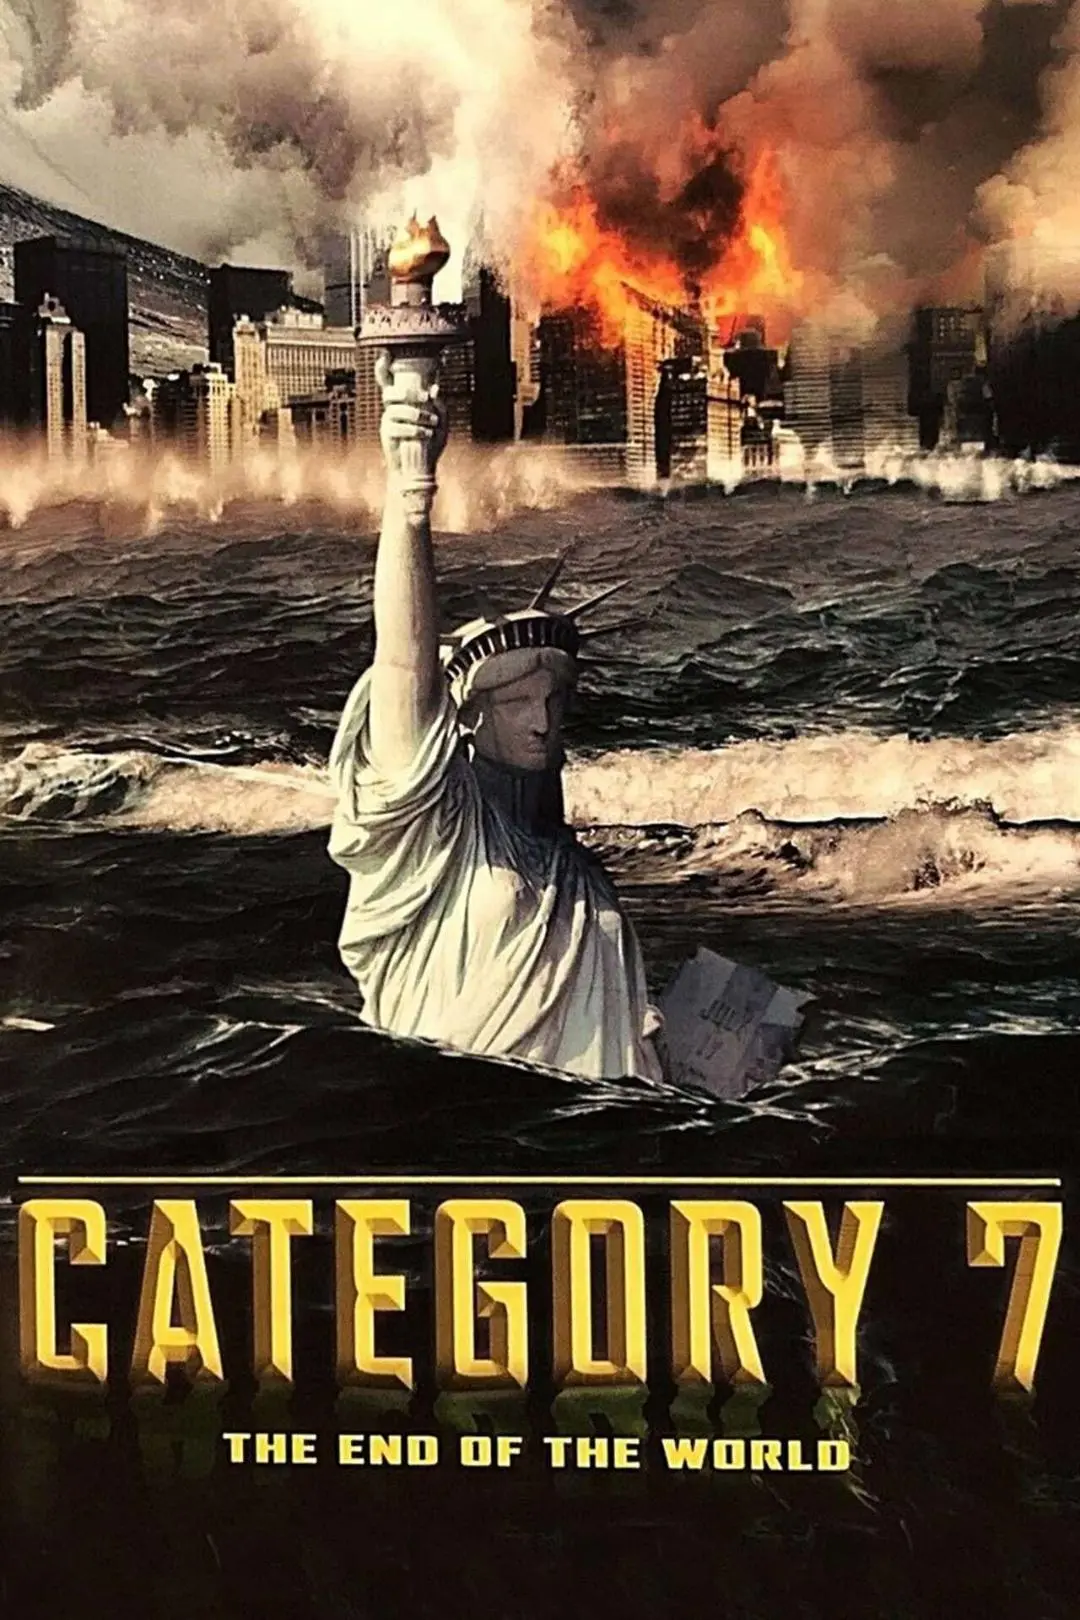 Category 7: The End of the World_peliplat